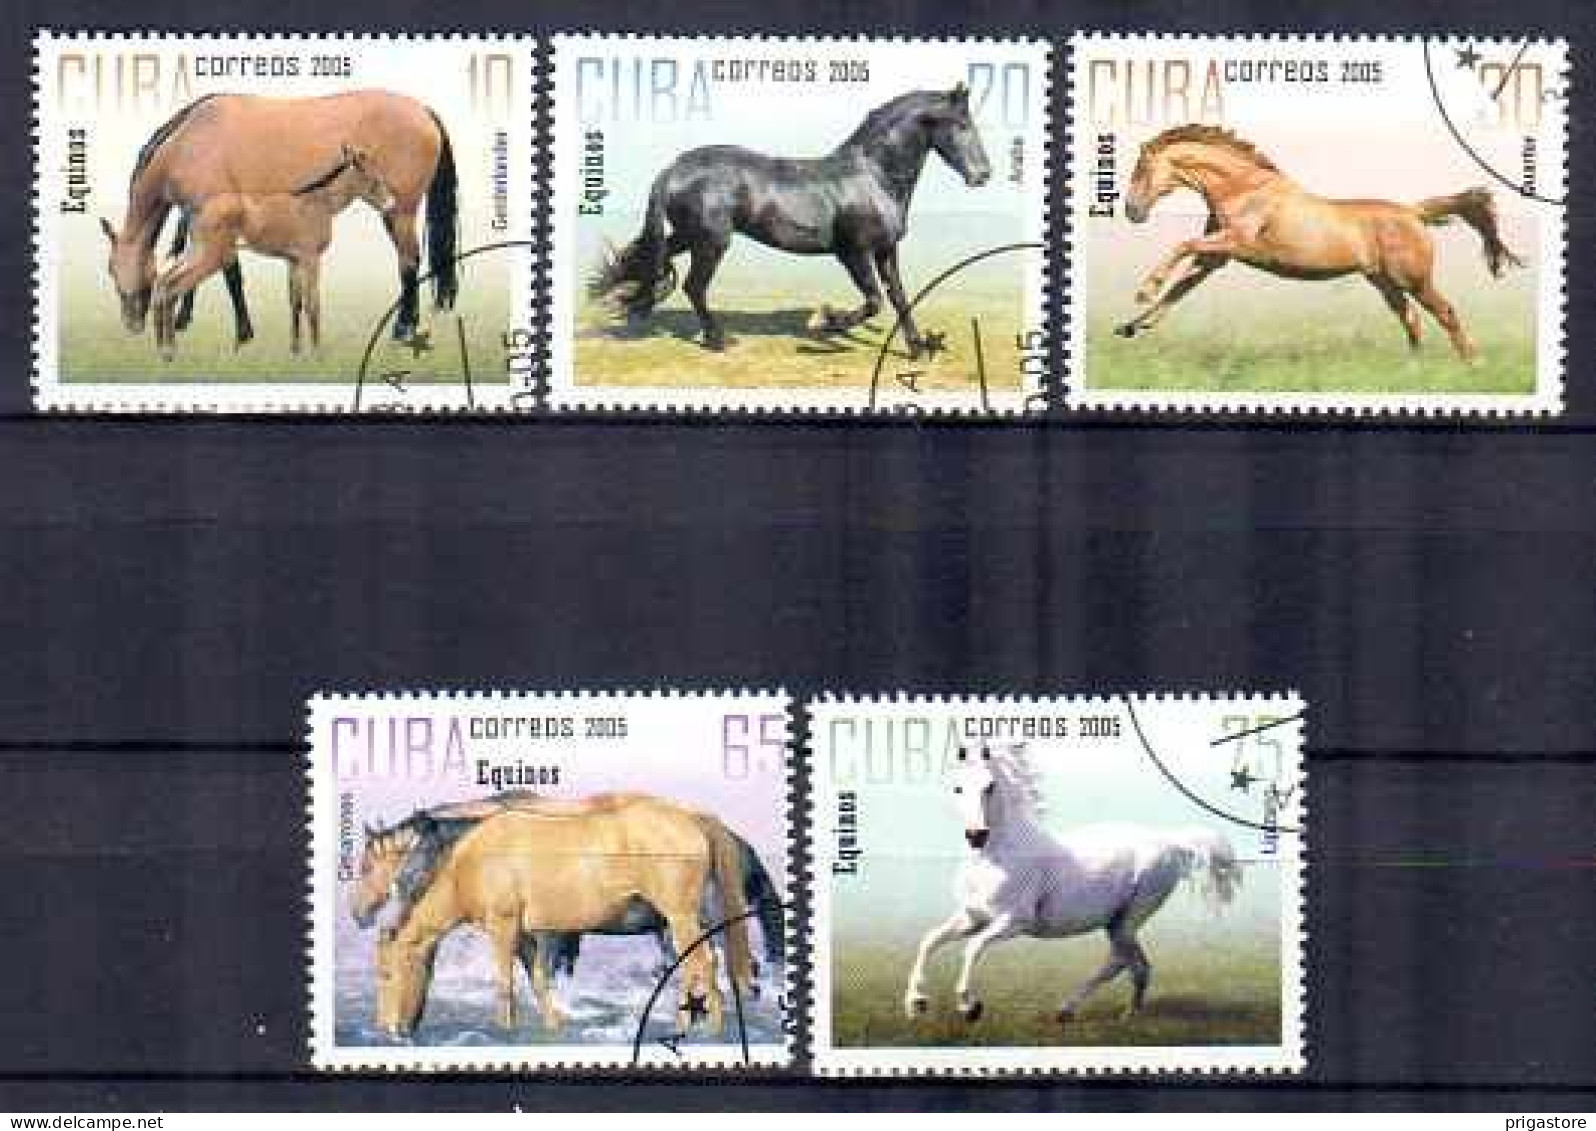 Cuba 2005 Chevaux (9) Yvert N° 4291 à 4295 Oblitérés Used - Used Stamps